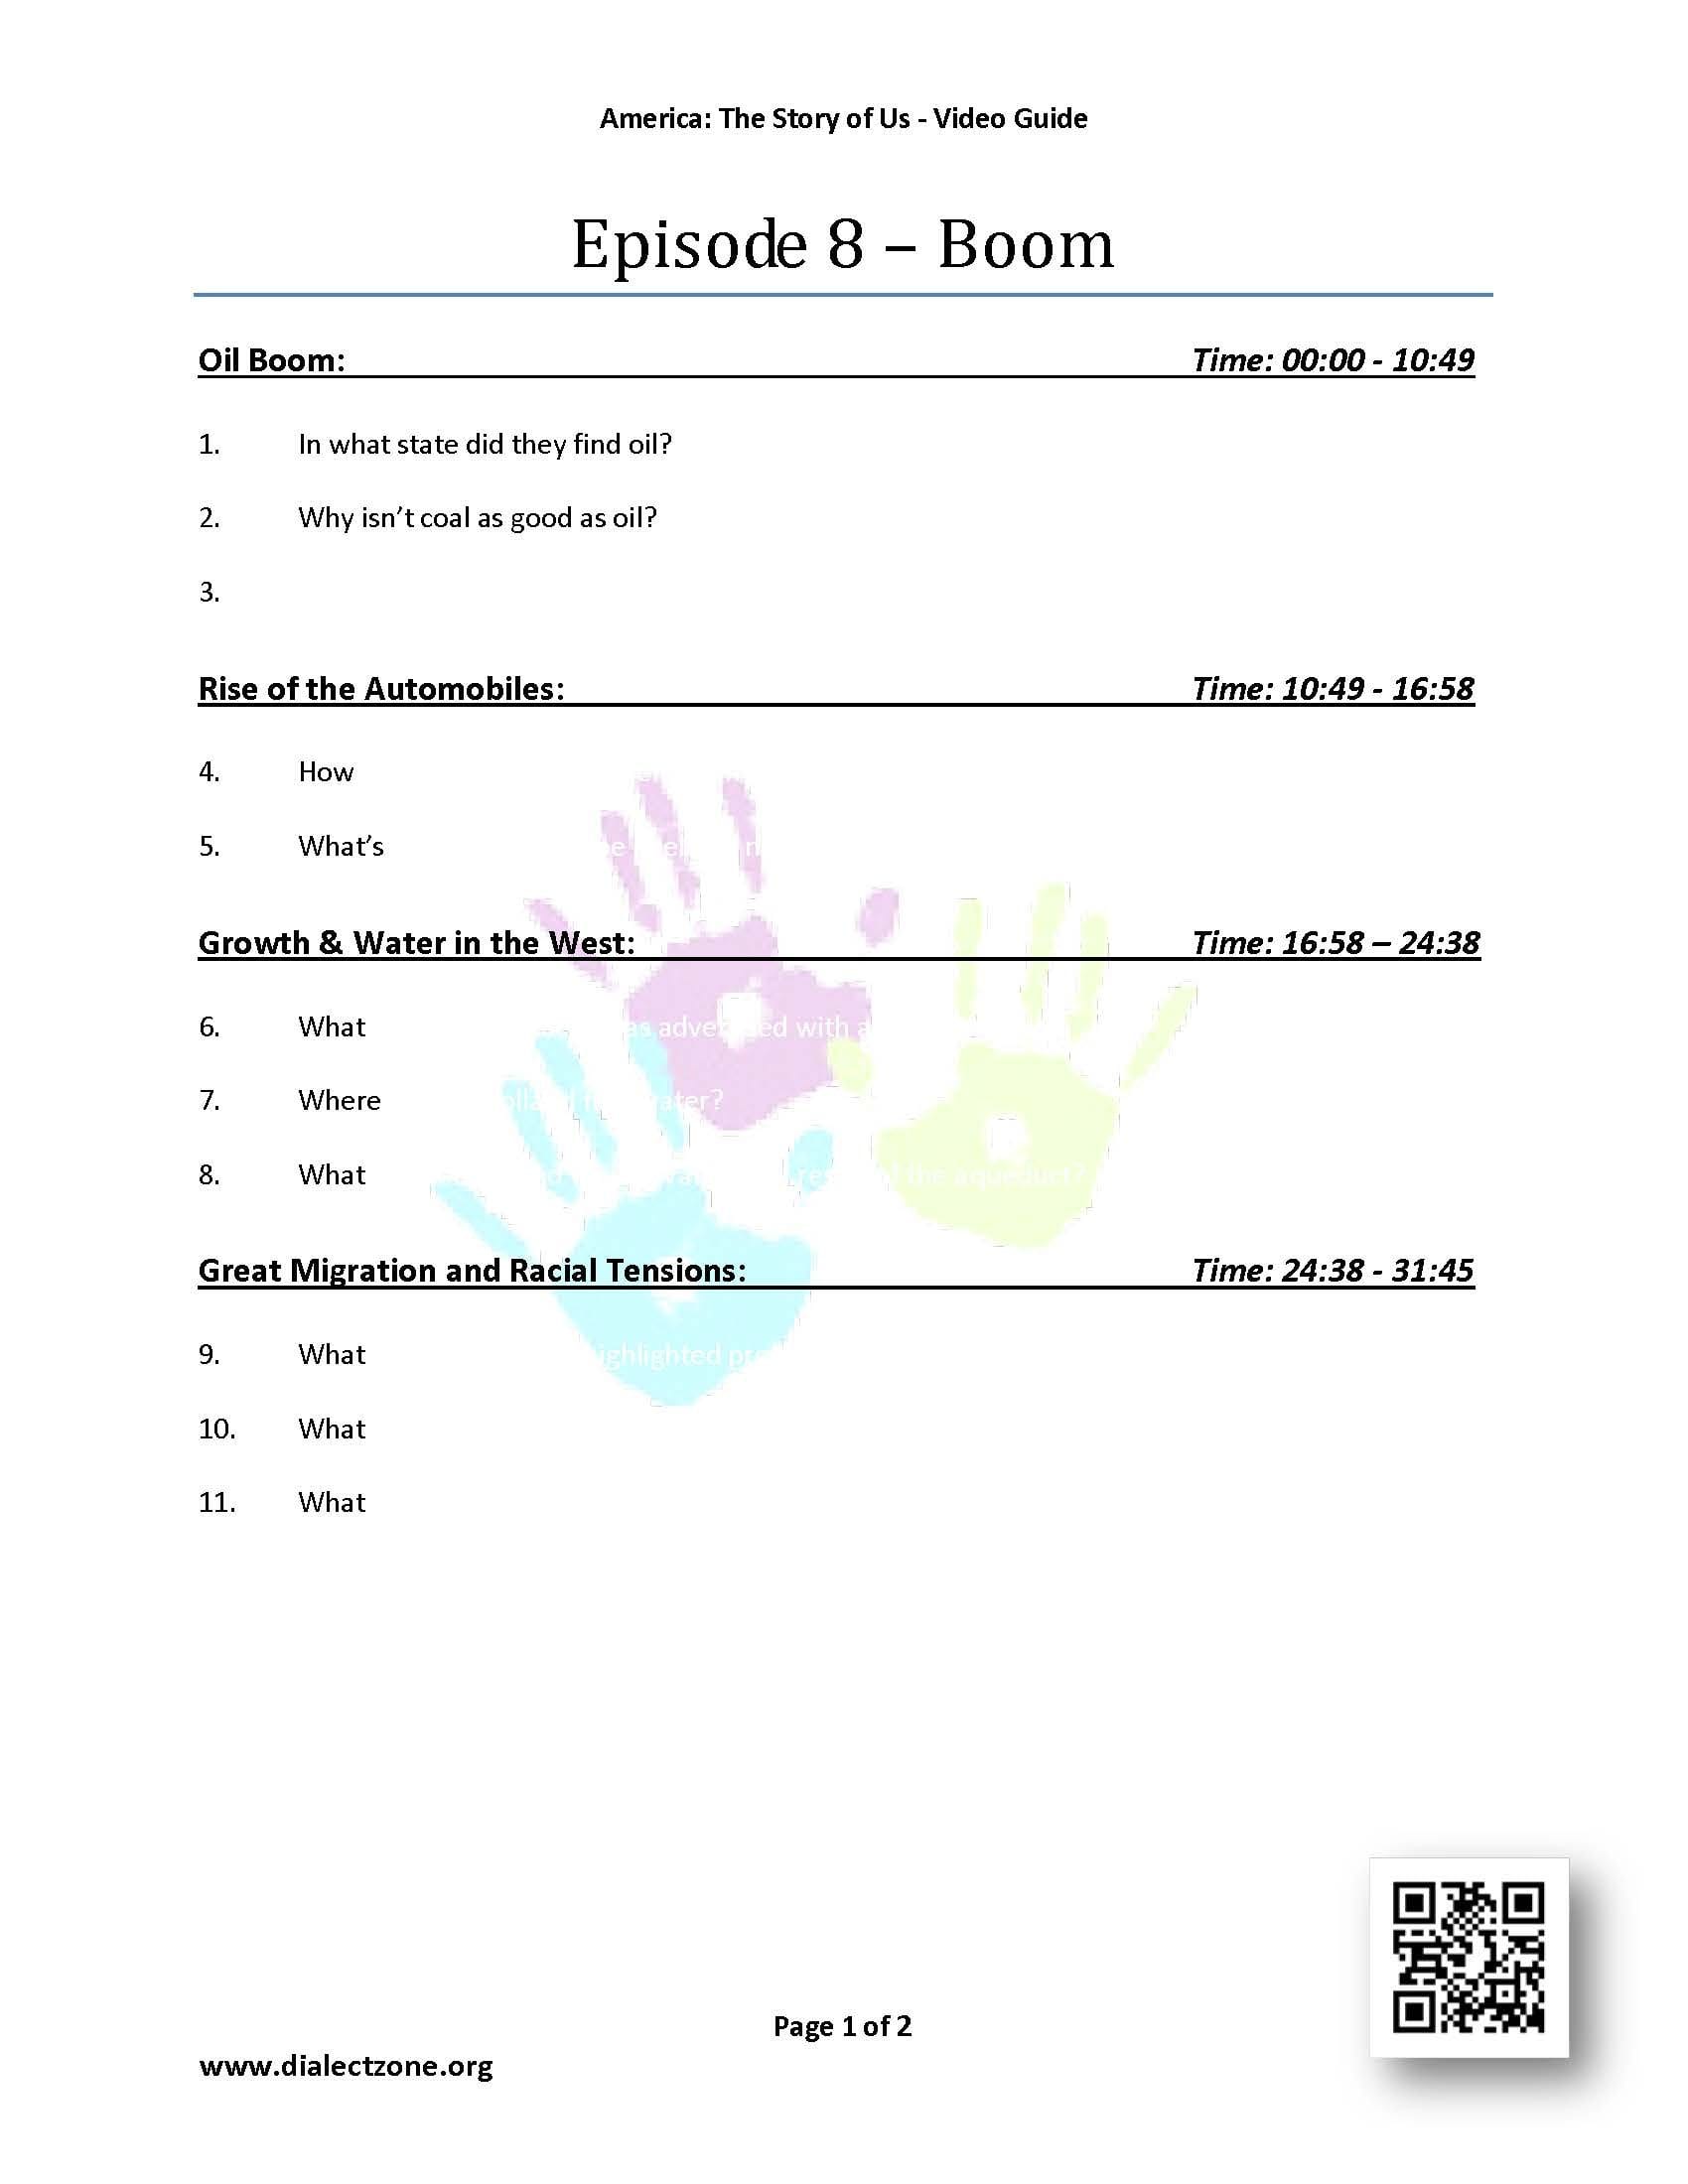 Episode 8  Boom  Worksheet Atsouep8  199  Dialect Zone Together With America The Story Of Us Boom Worksheet